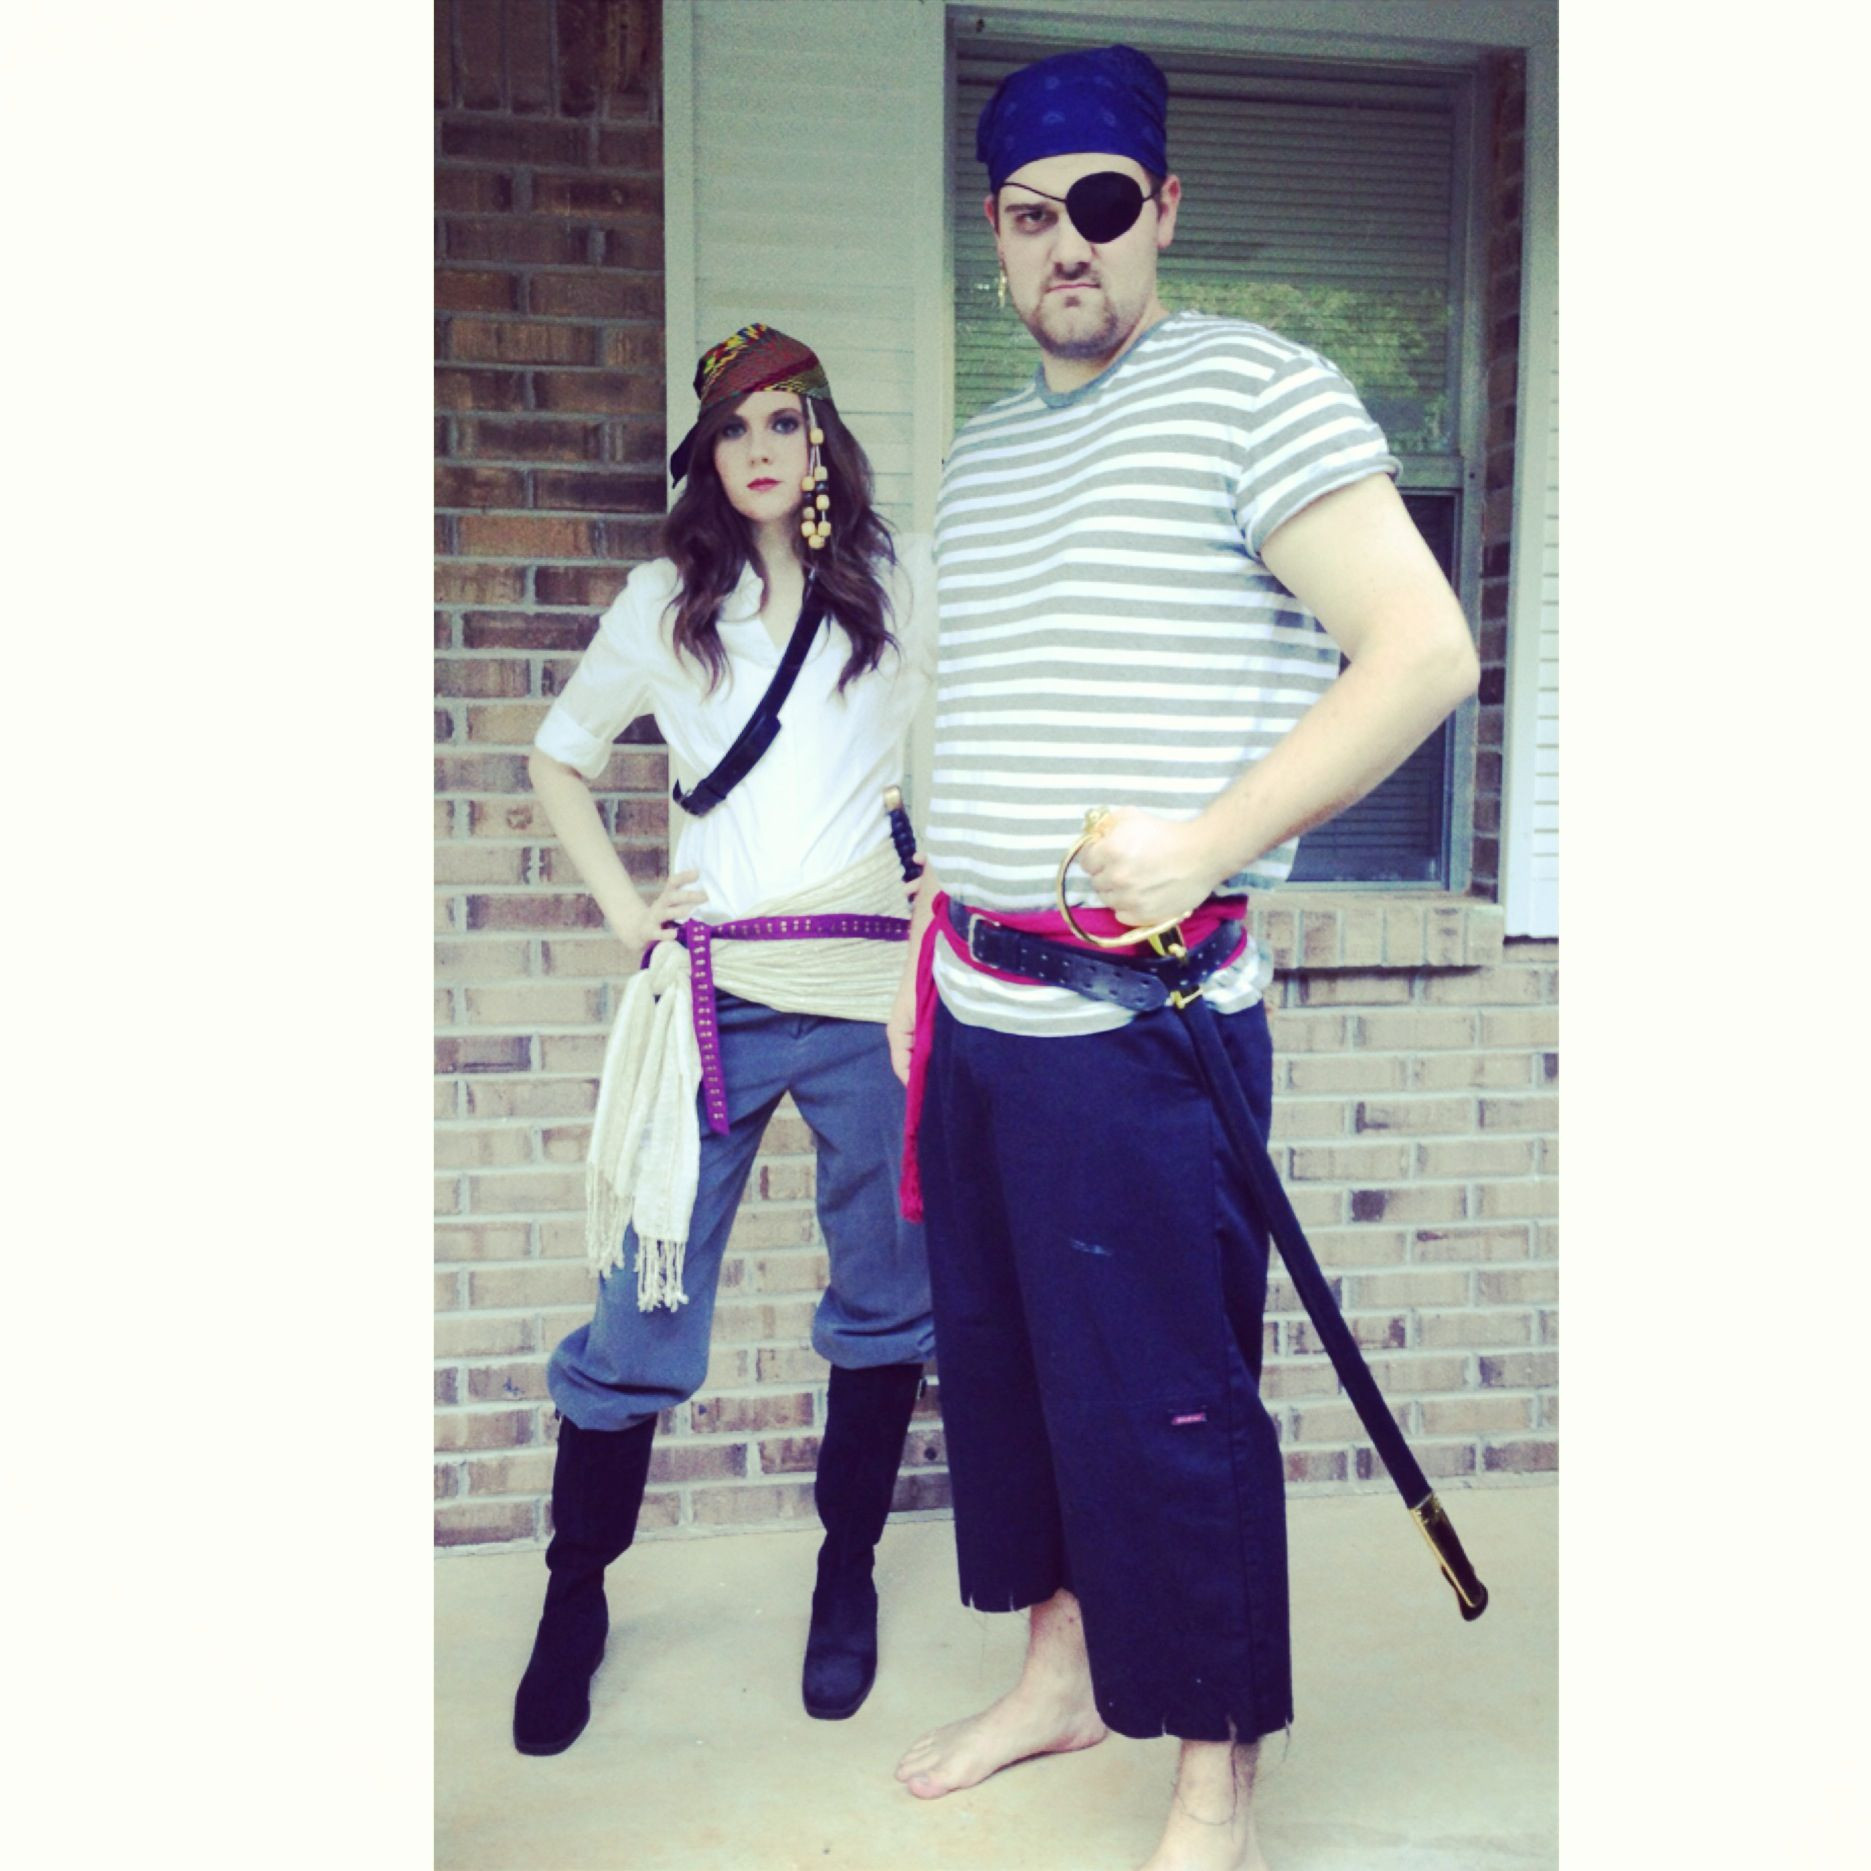 DIY Pirate Costume For Adults
 DIY pirate costumes